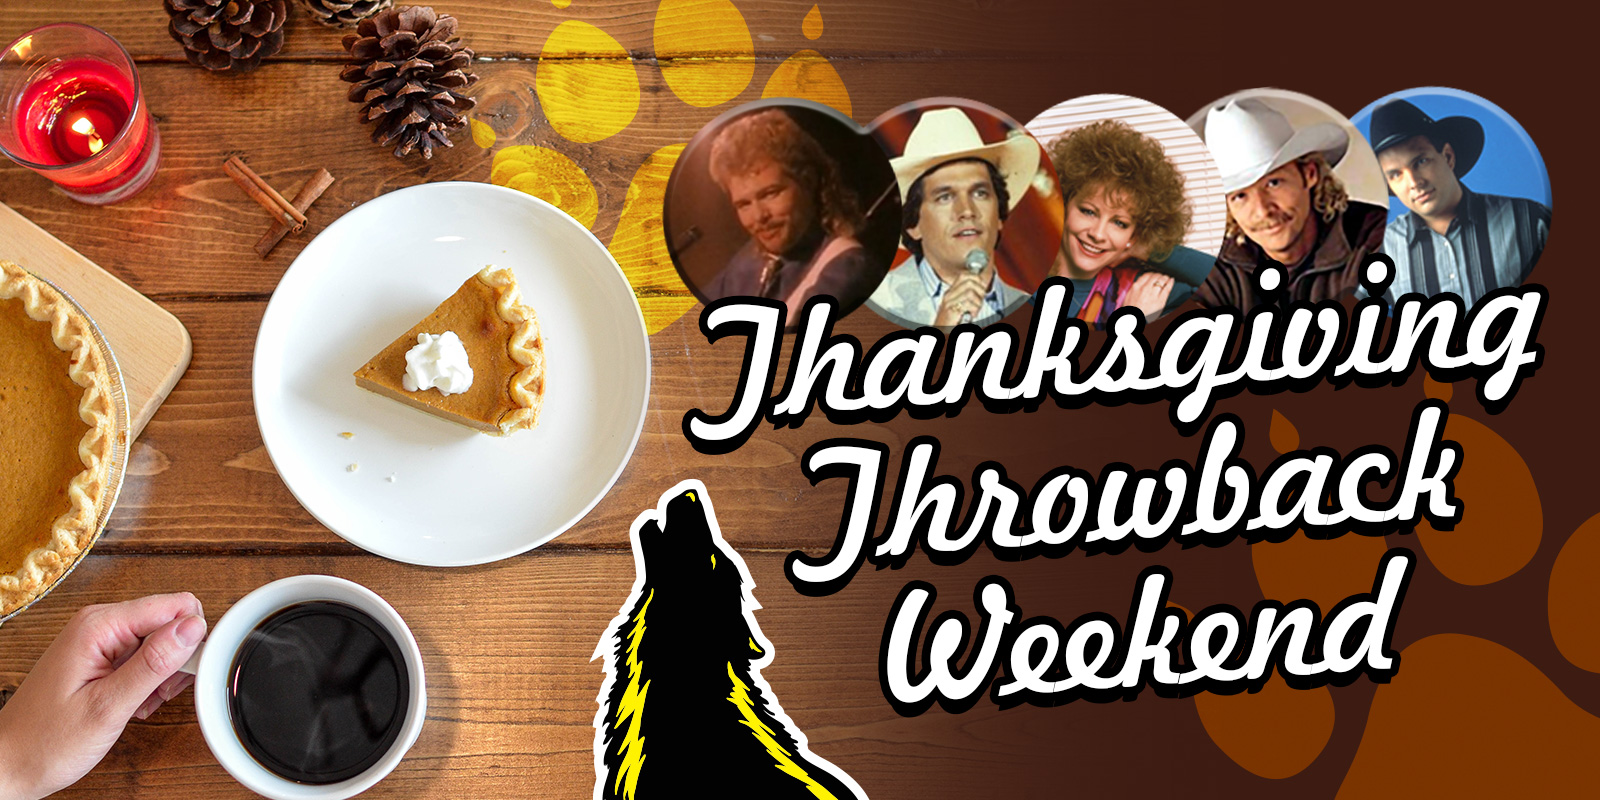 Thanksgiving Throwback Weekend – When You’re Throwing Back Turkey, Listen to Some Throwback Tunes